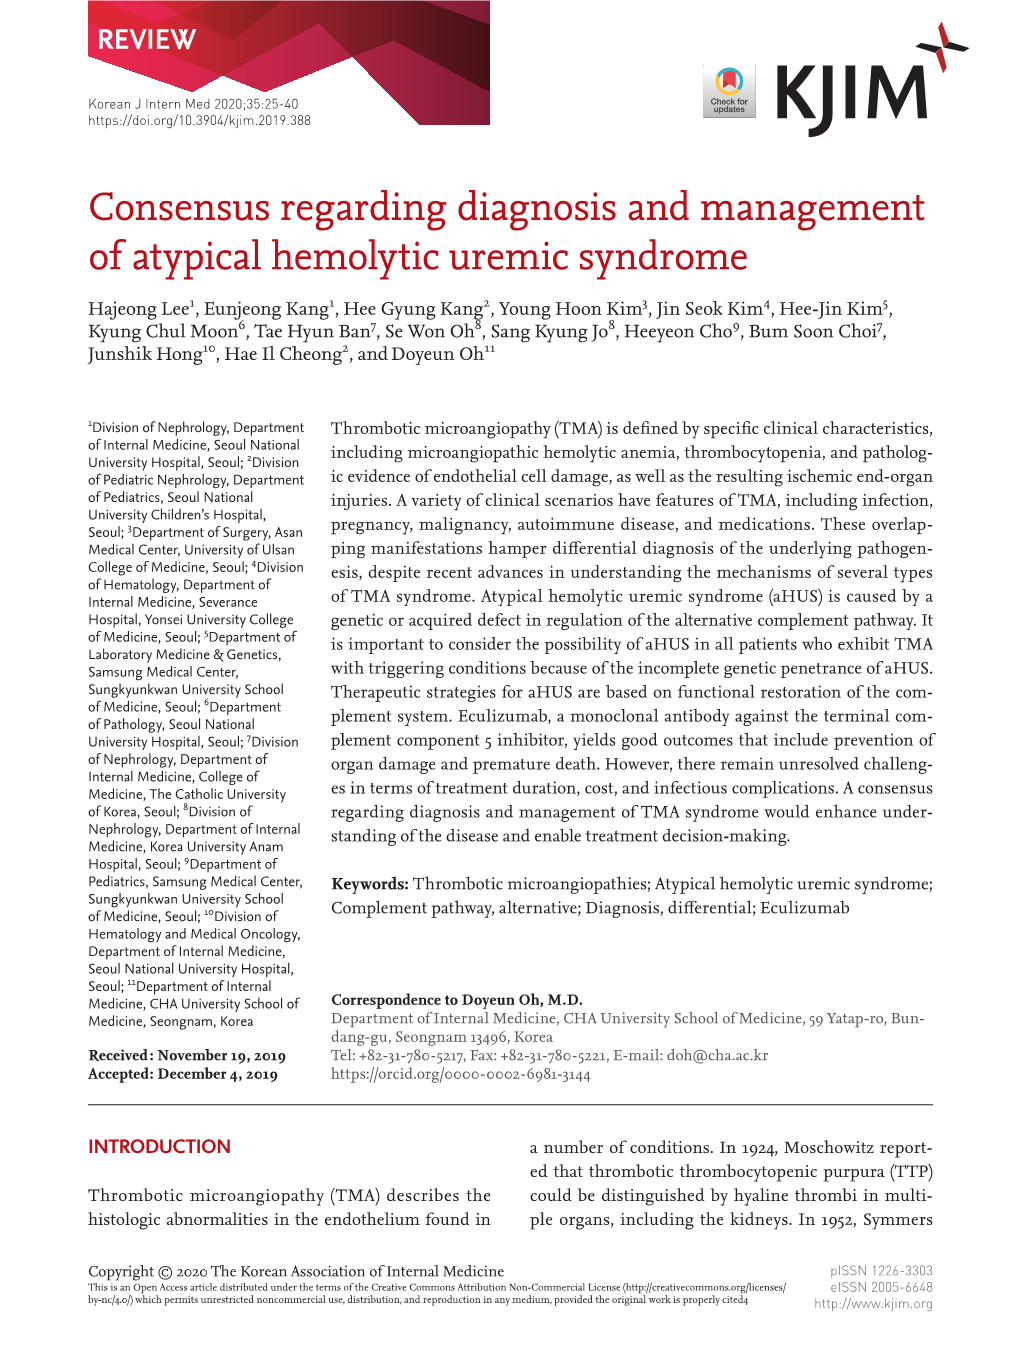 Consensus Regarding Diagnosis and Management of Atypical Hemolytic Uremic Syndrome